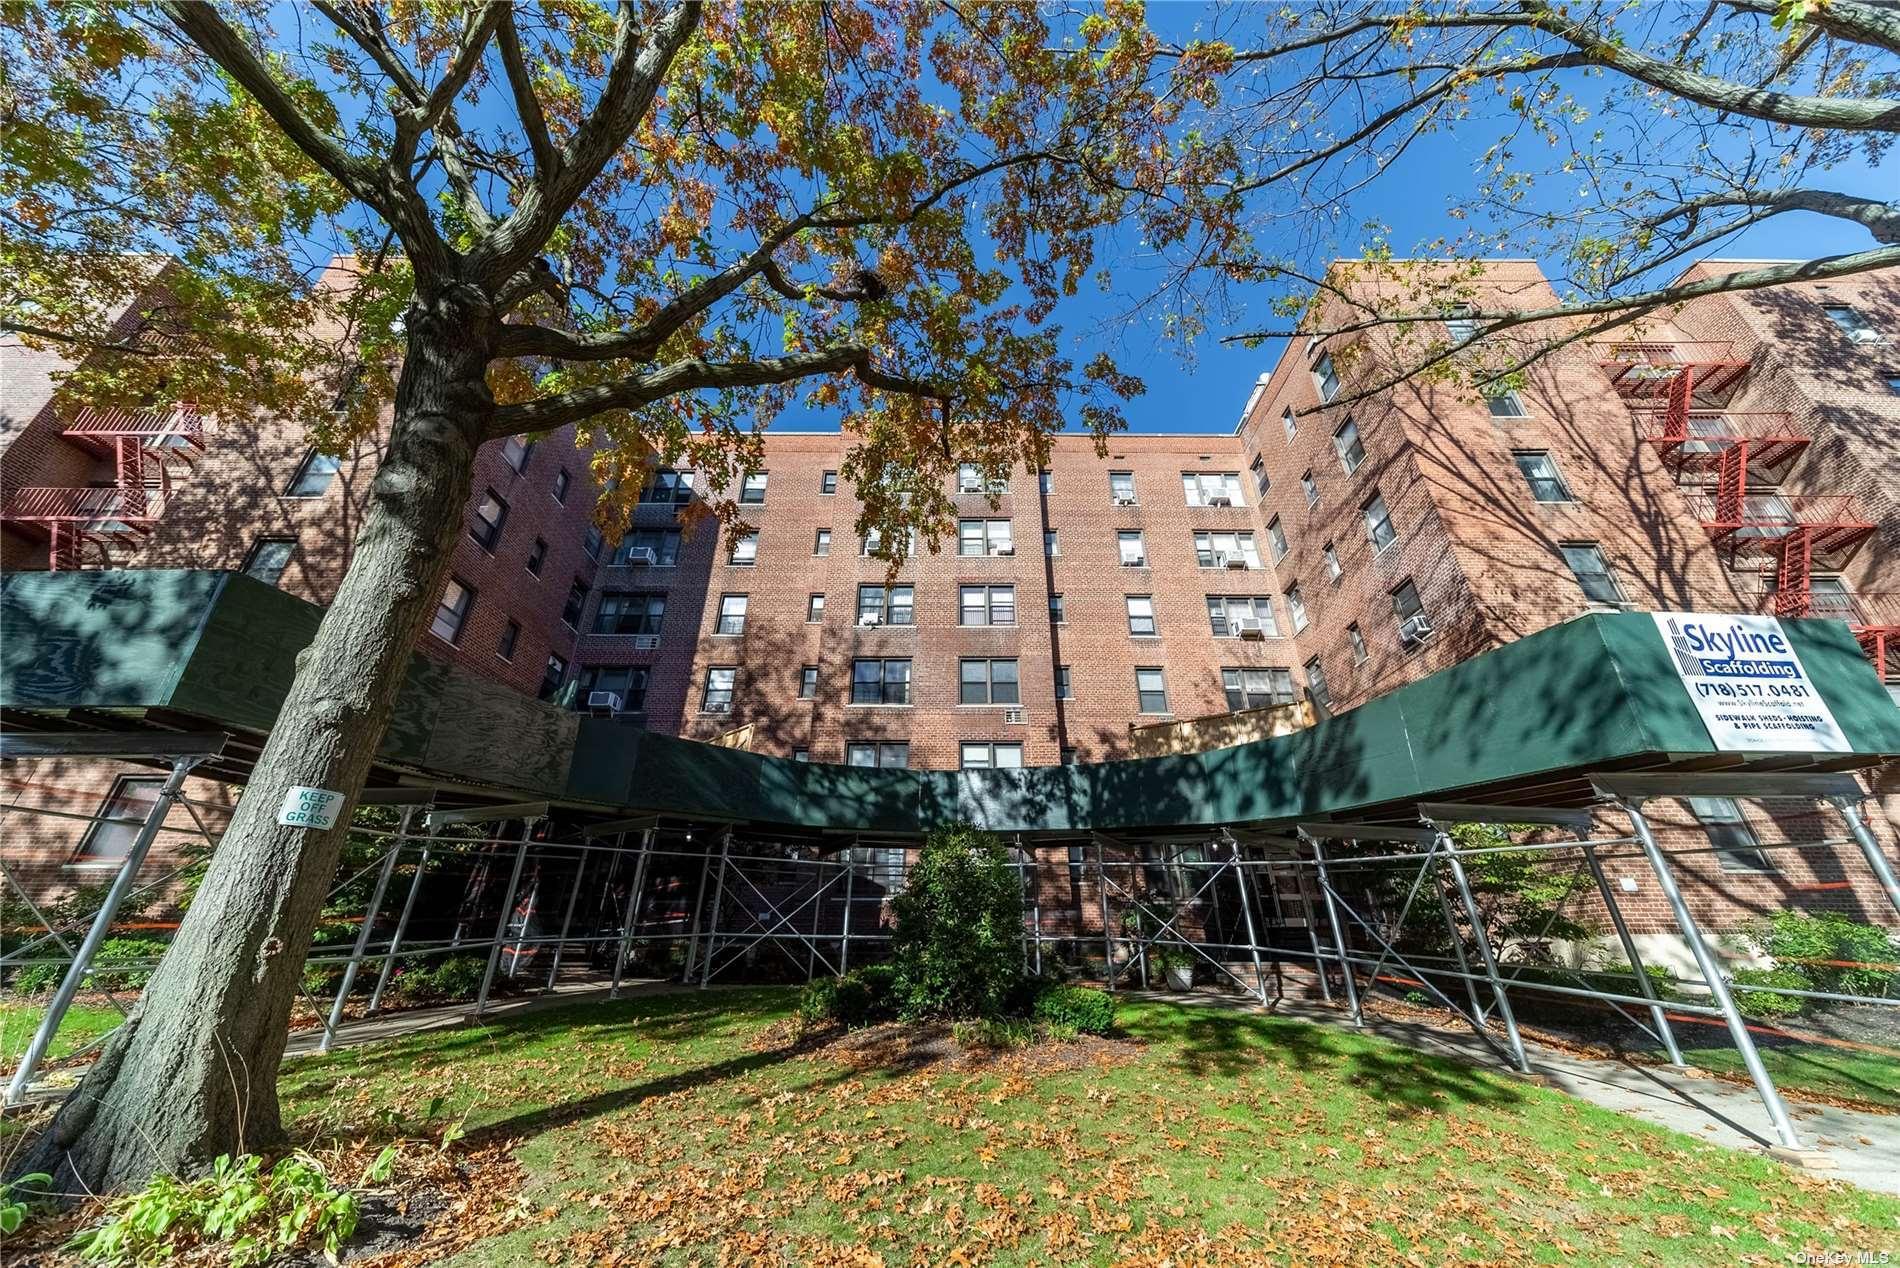 142-21 26th Ave #5A in Queens, Flushing, NY 11354